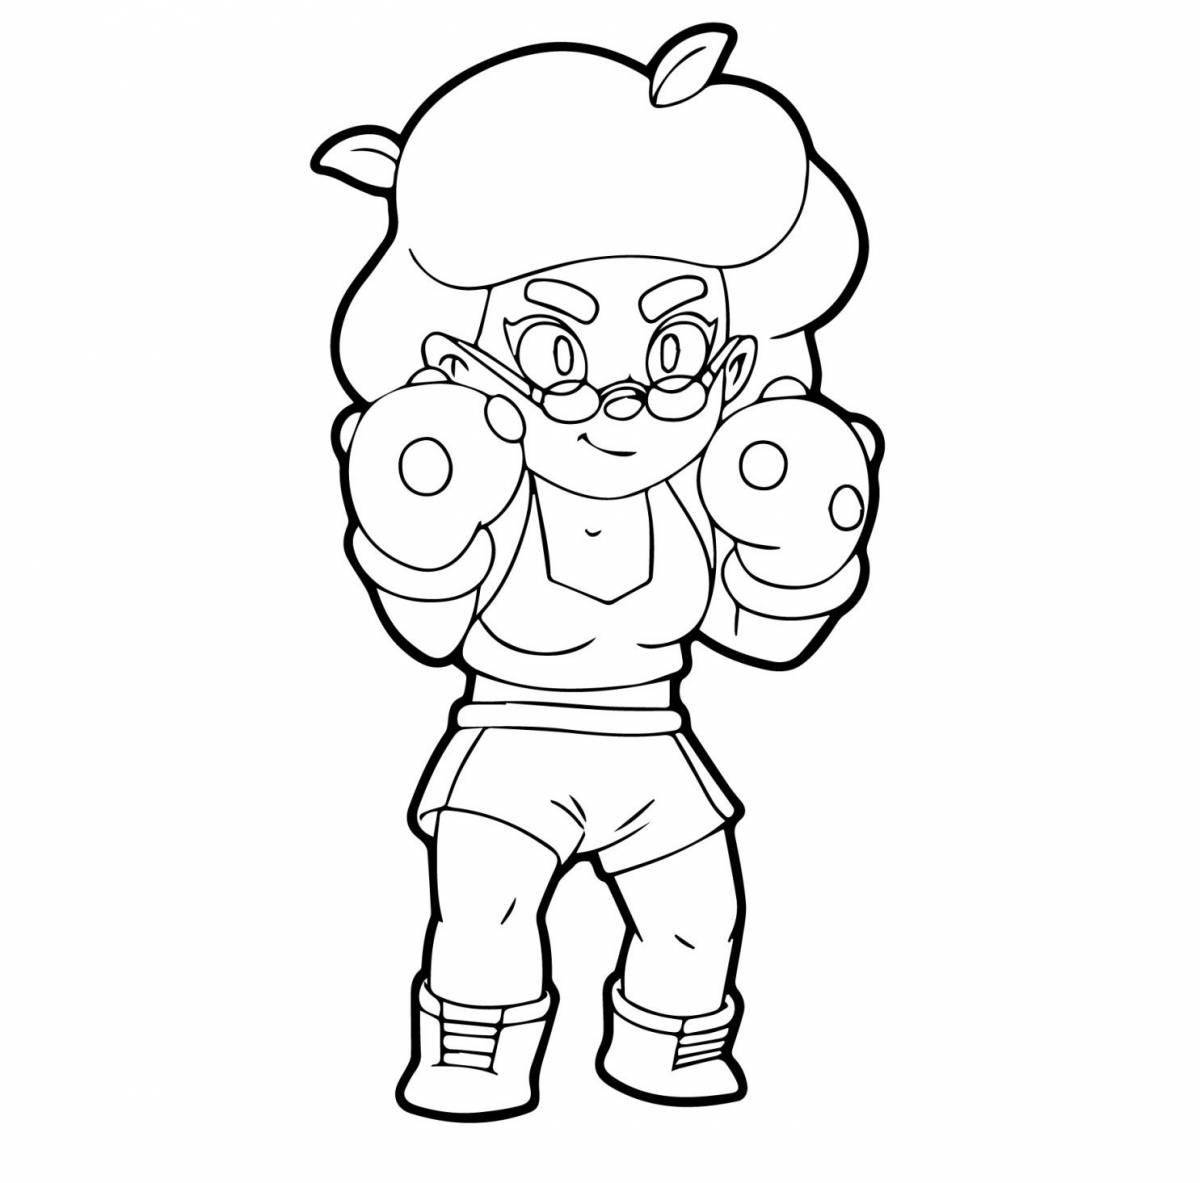 Colorful brawl stars coloring book characters